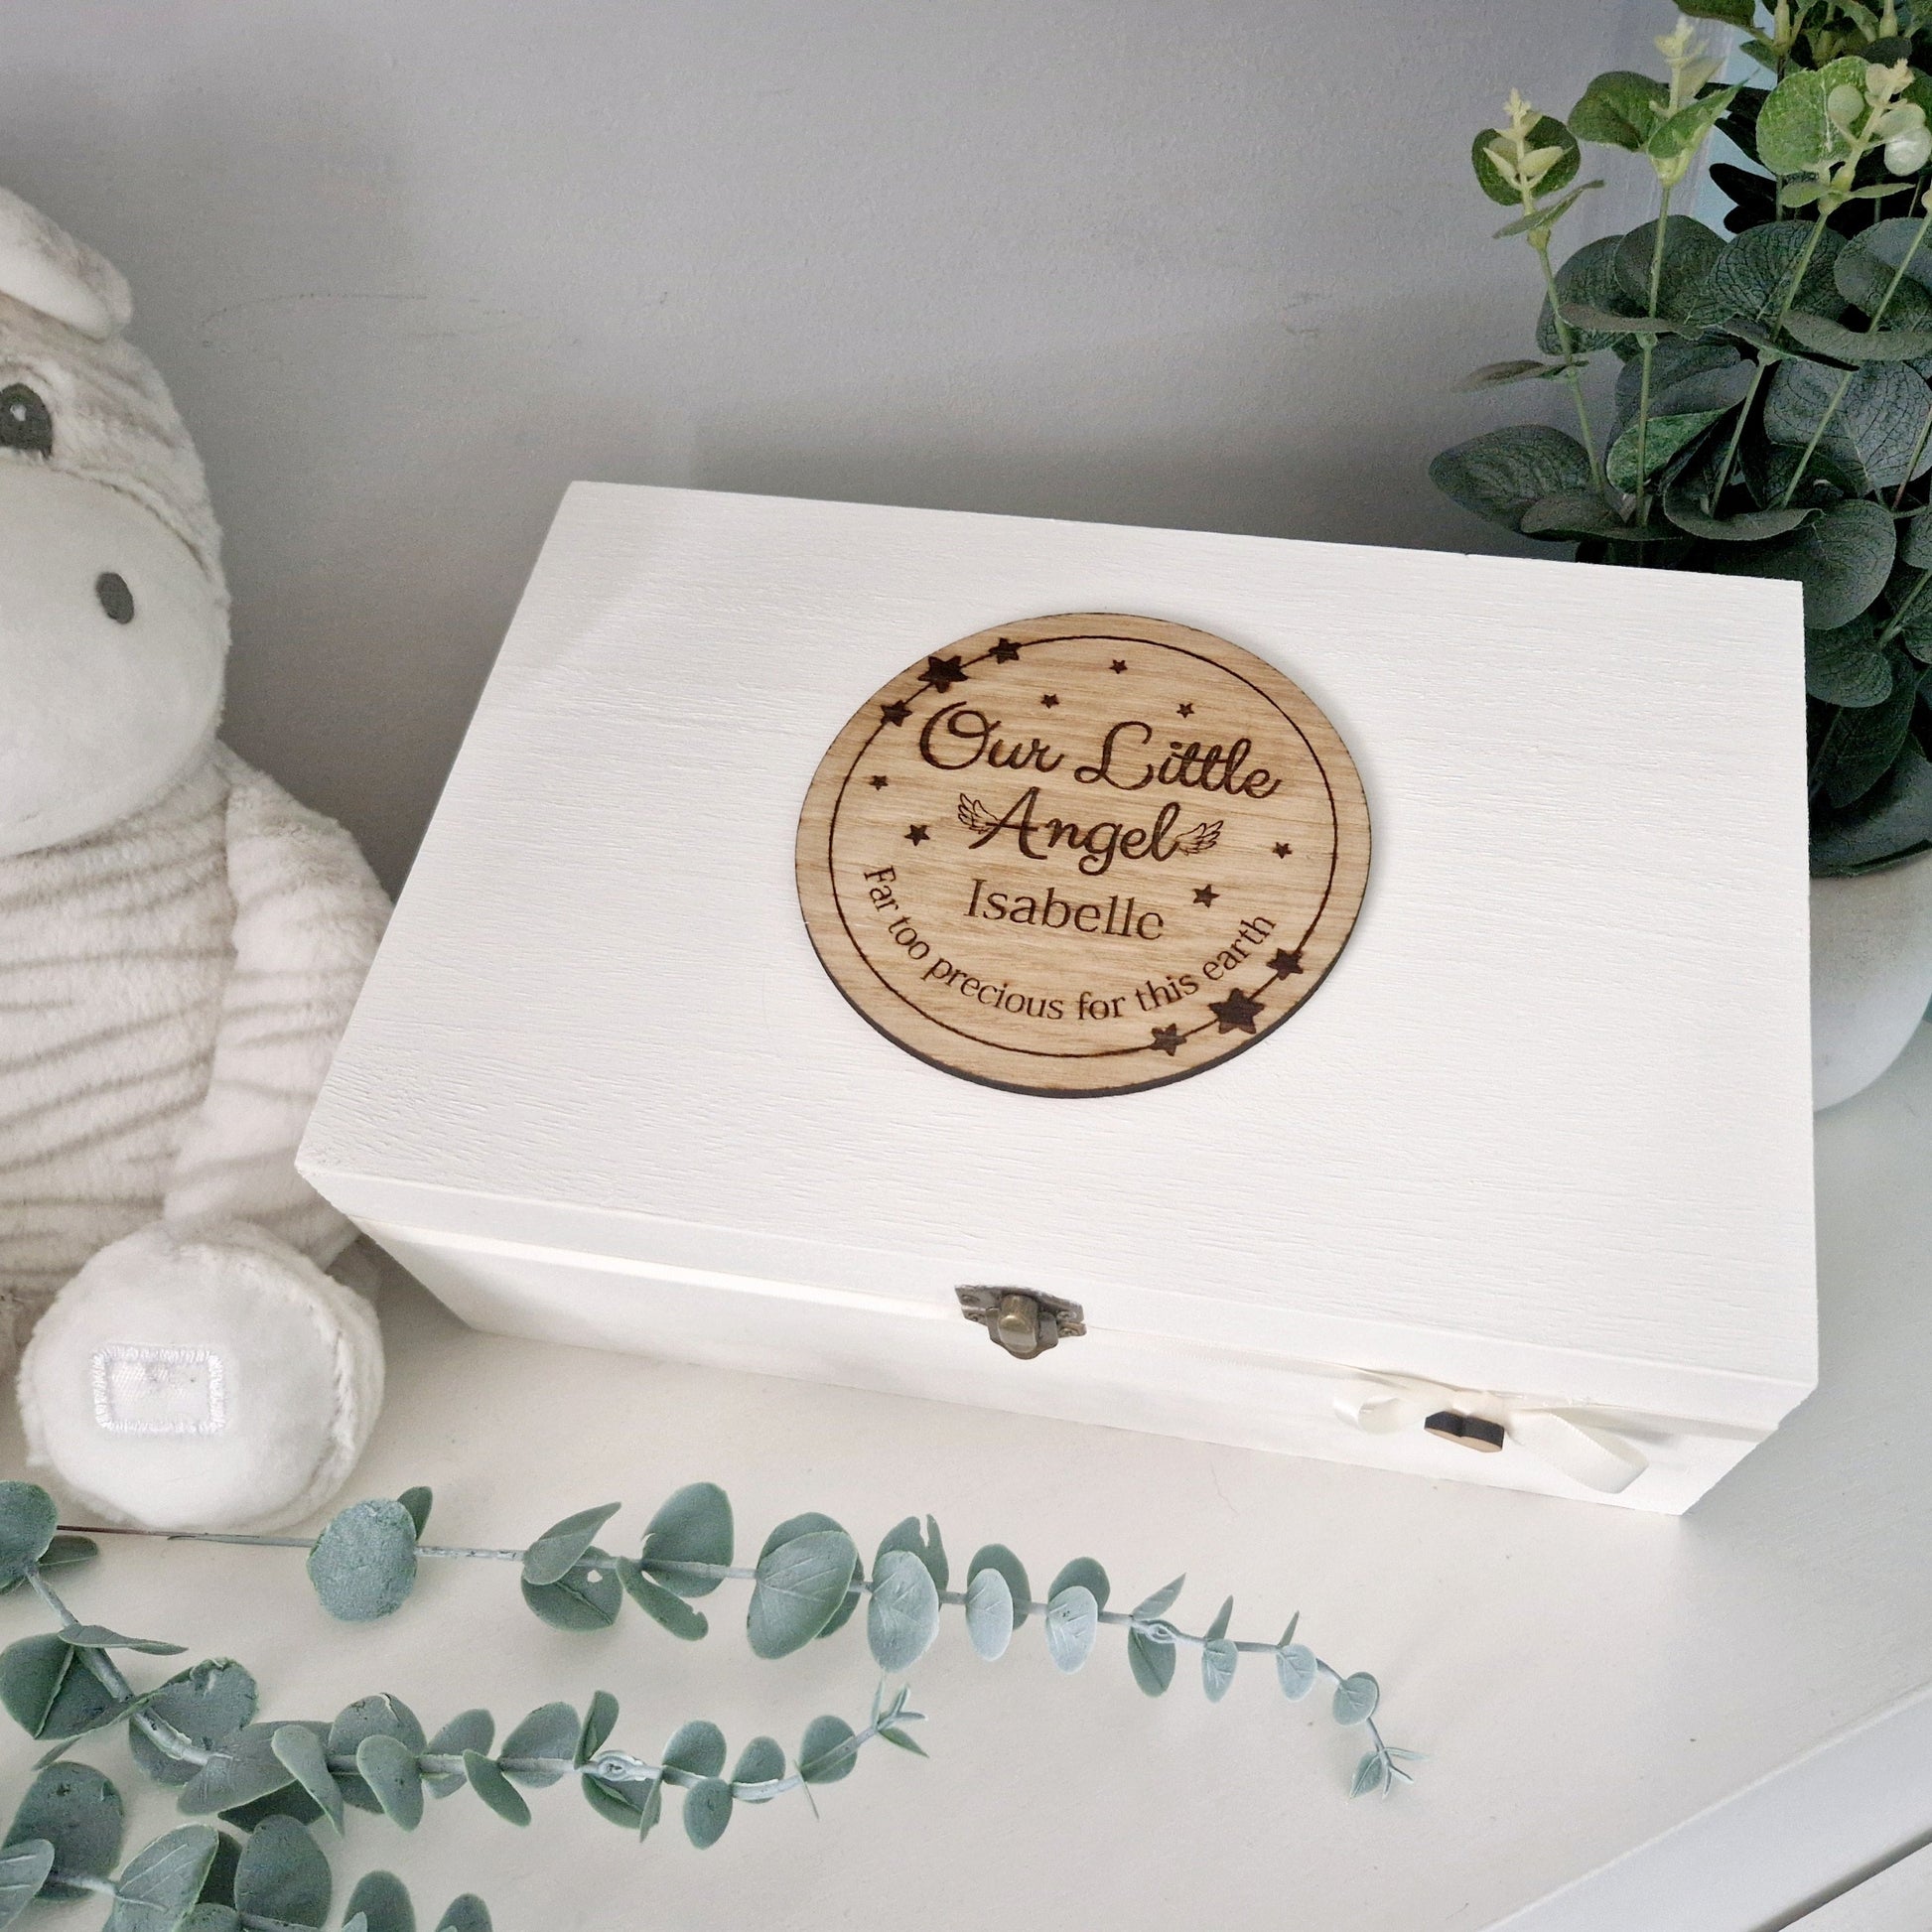 Baby Loss Memory Box. Engraved wooden memory box for remembering an angel baby.